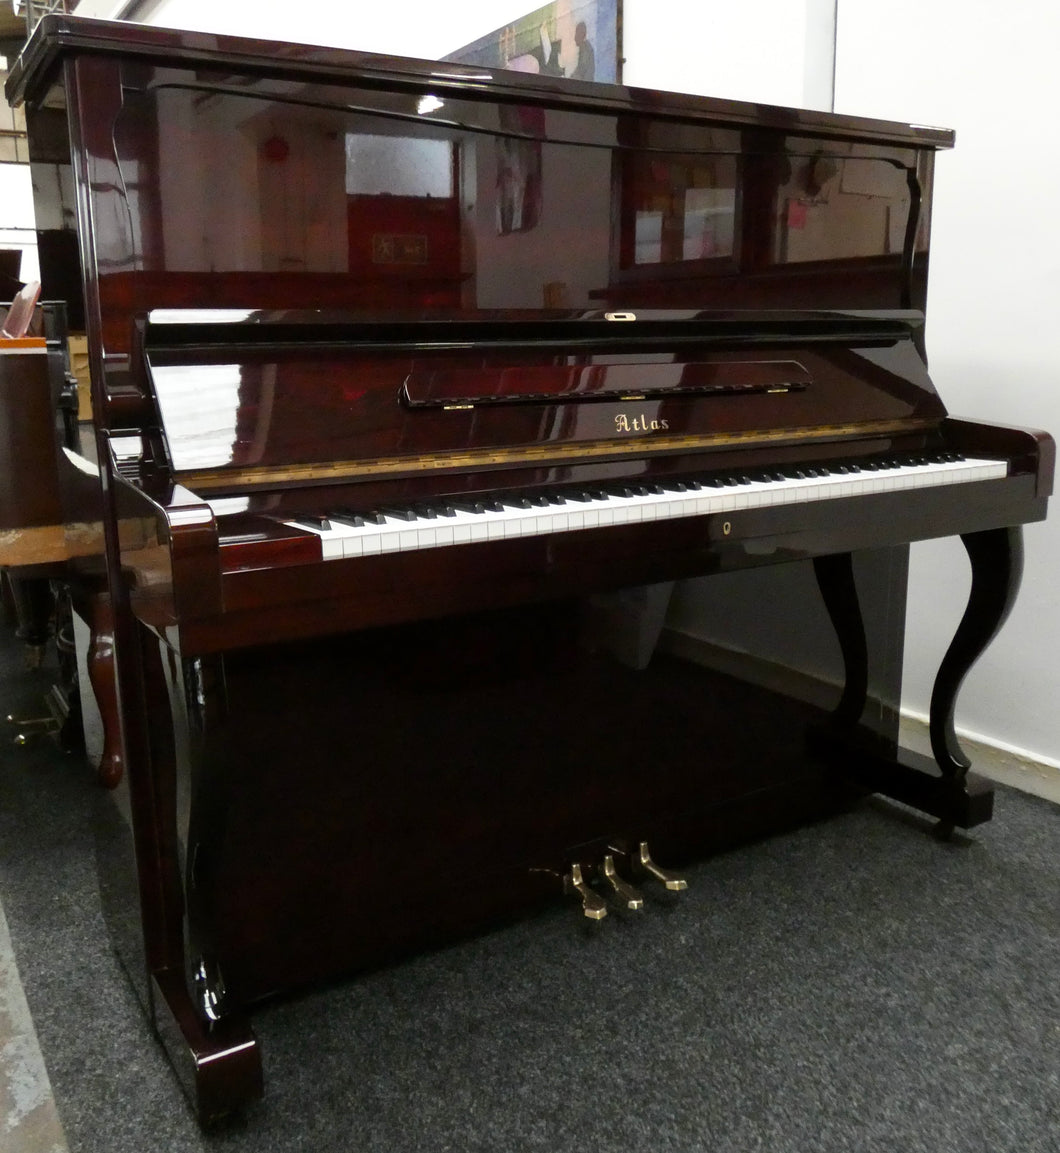 Atlas A55M Upright Piano in Rosewood Gloss Finish